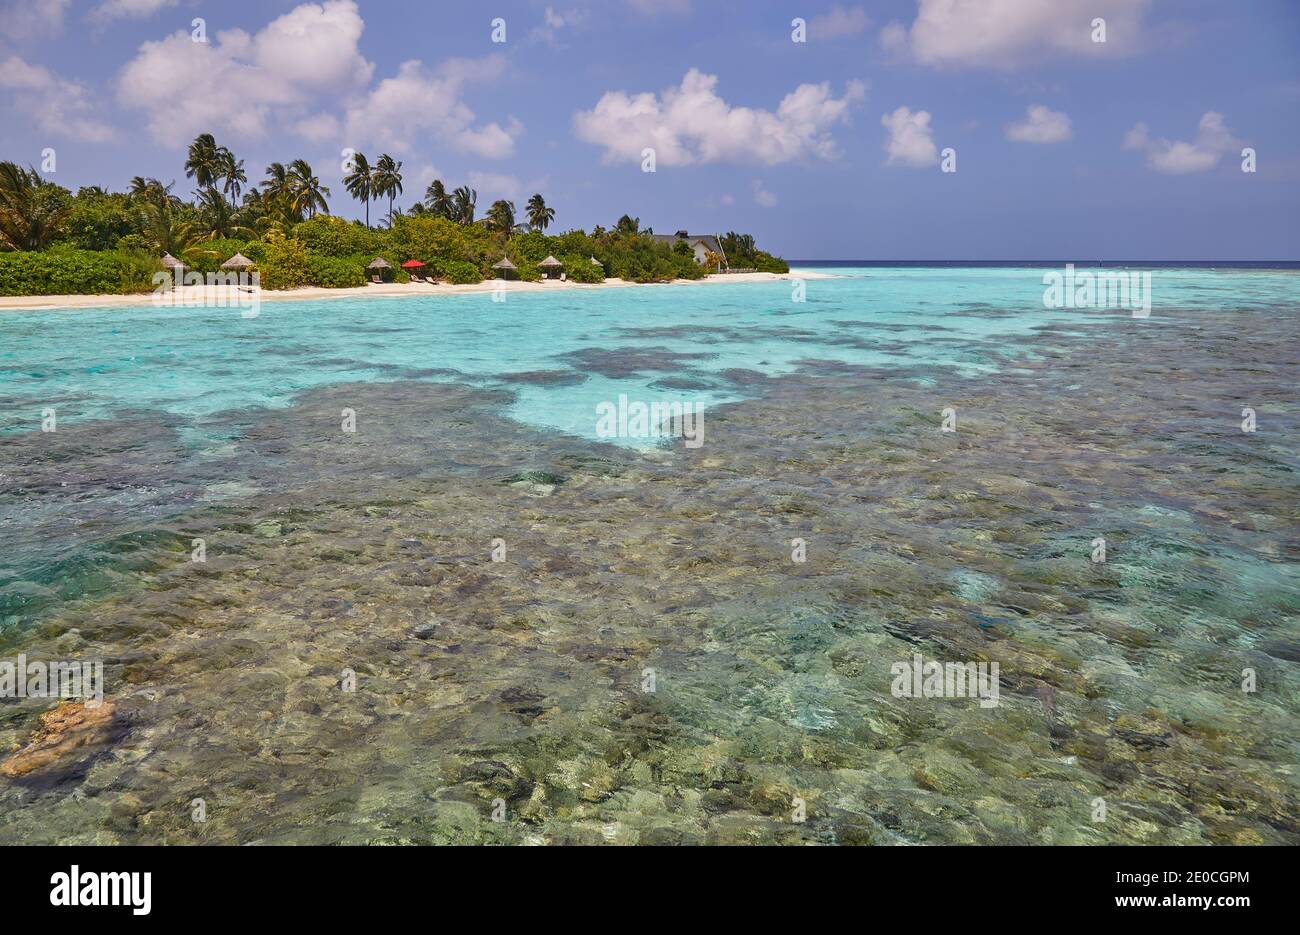 A tropical island fringing reef, just offshore from Havodda island ...